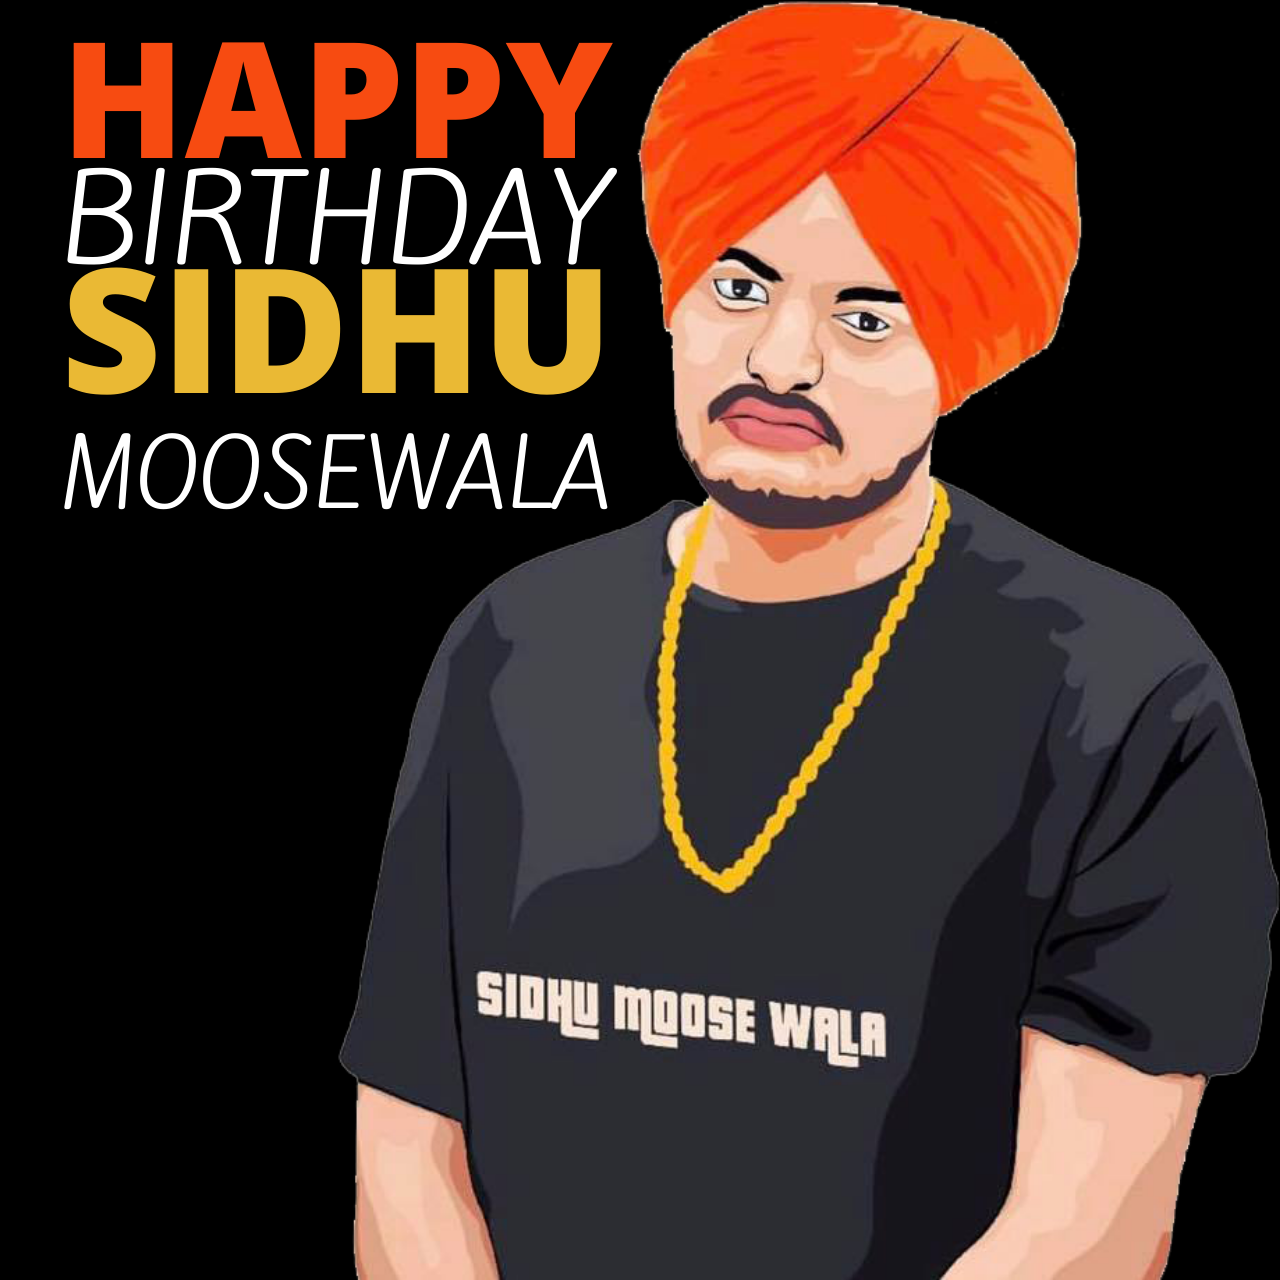 Happy Birthday Sidhu Moose Wala: Wishes, Status, Images (photo), and Messages to Greet Singer of "So High"